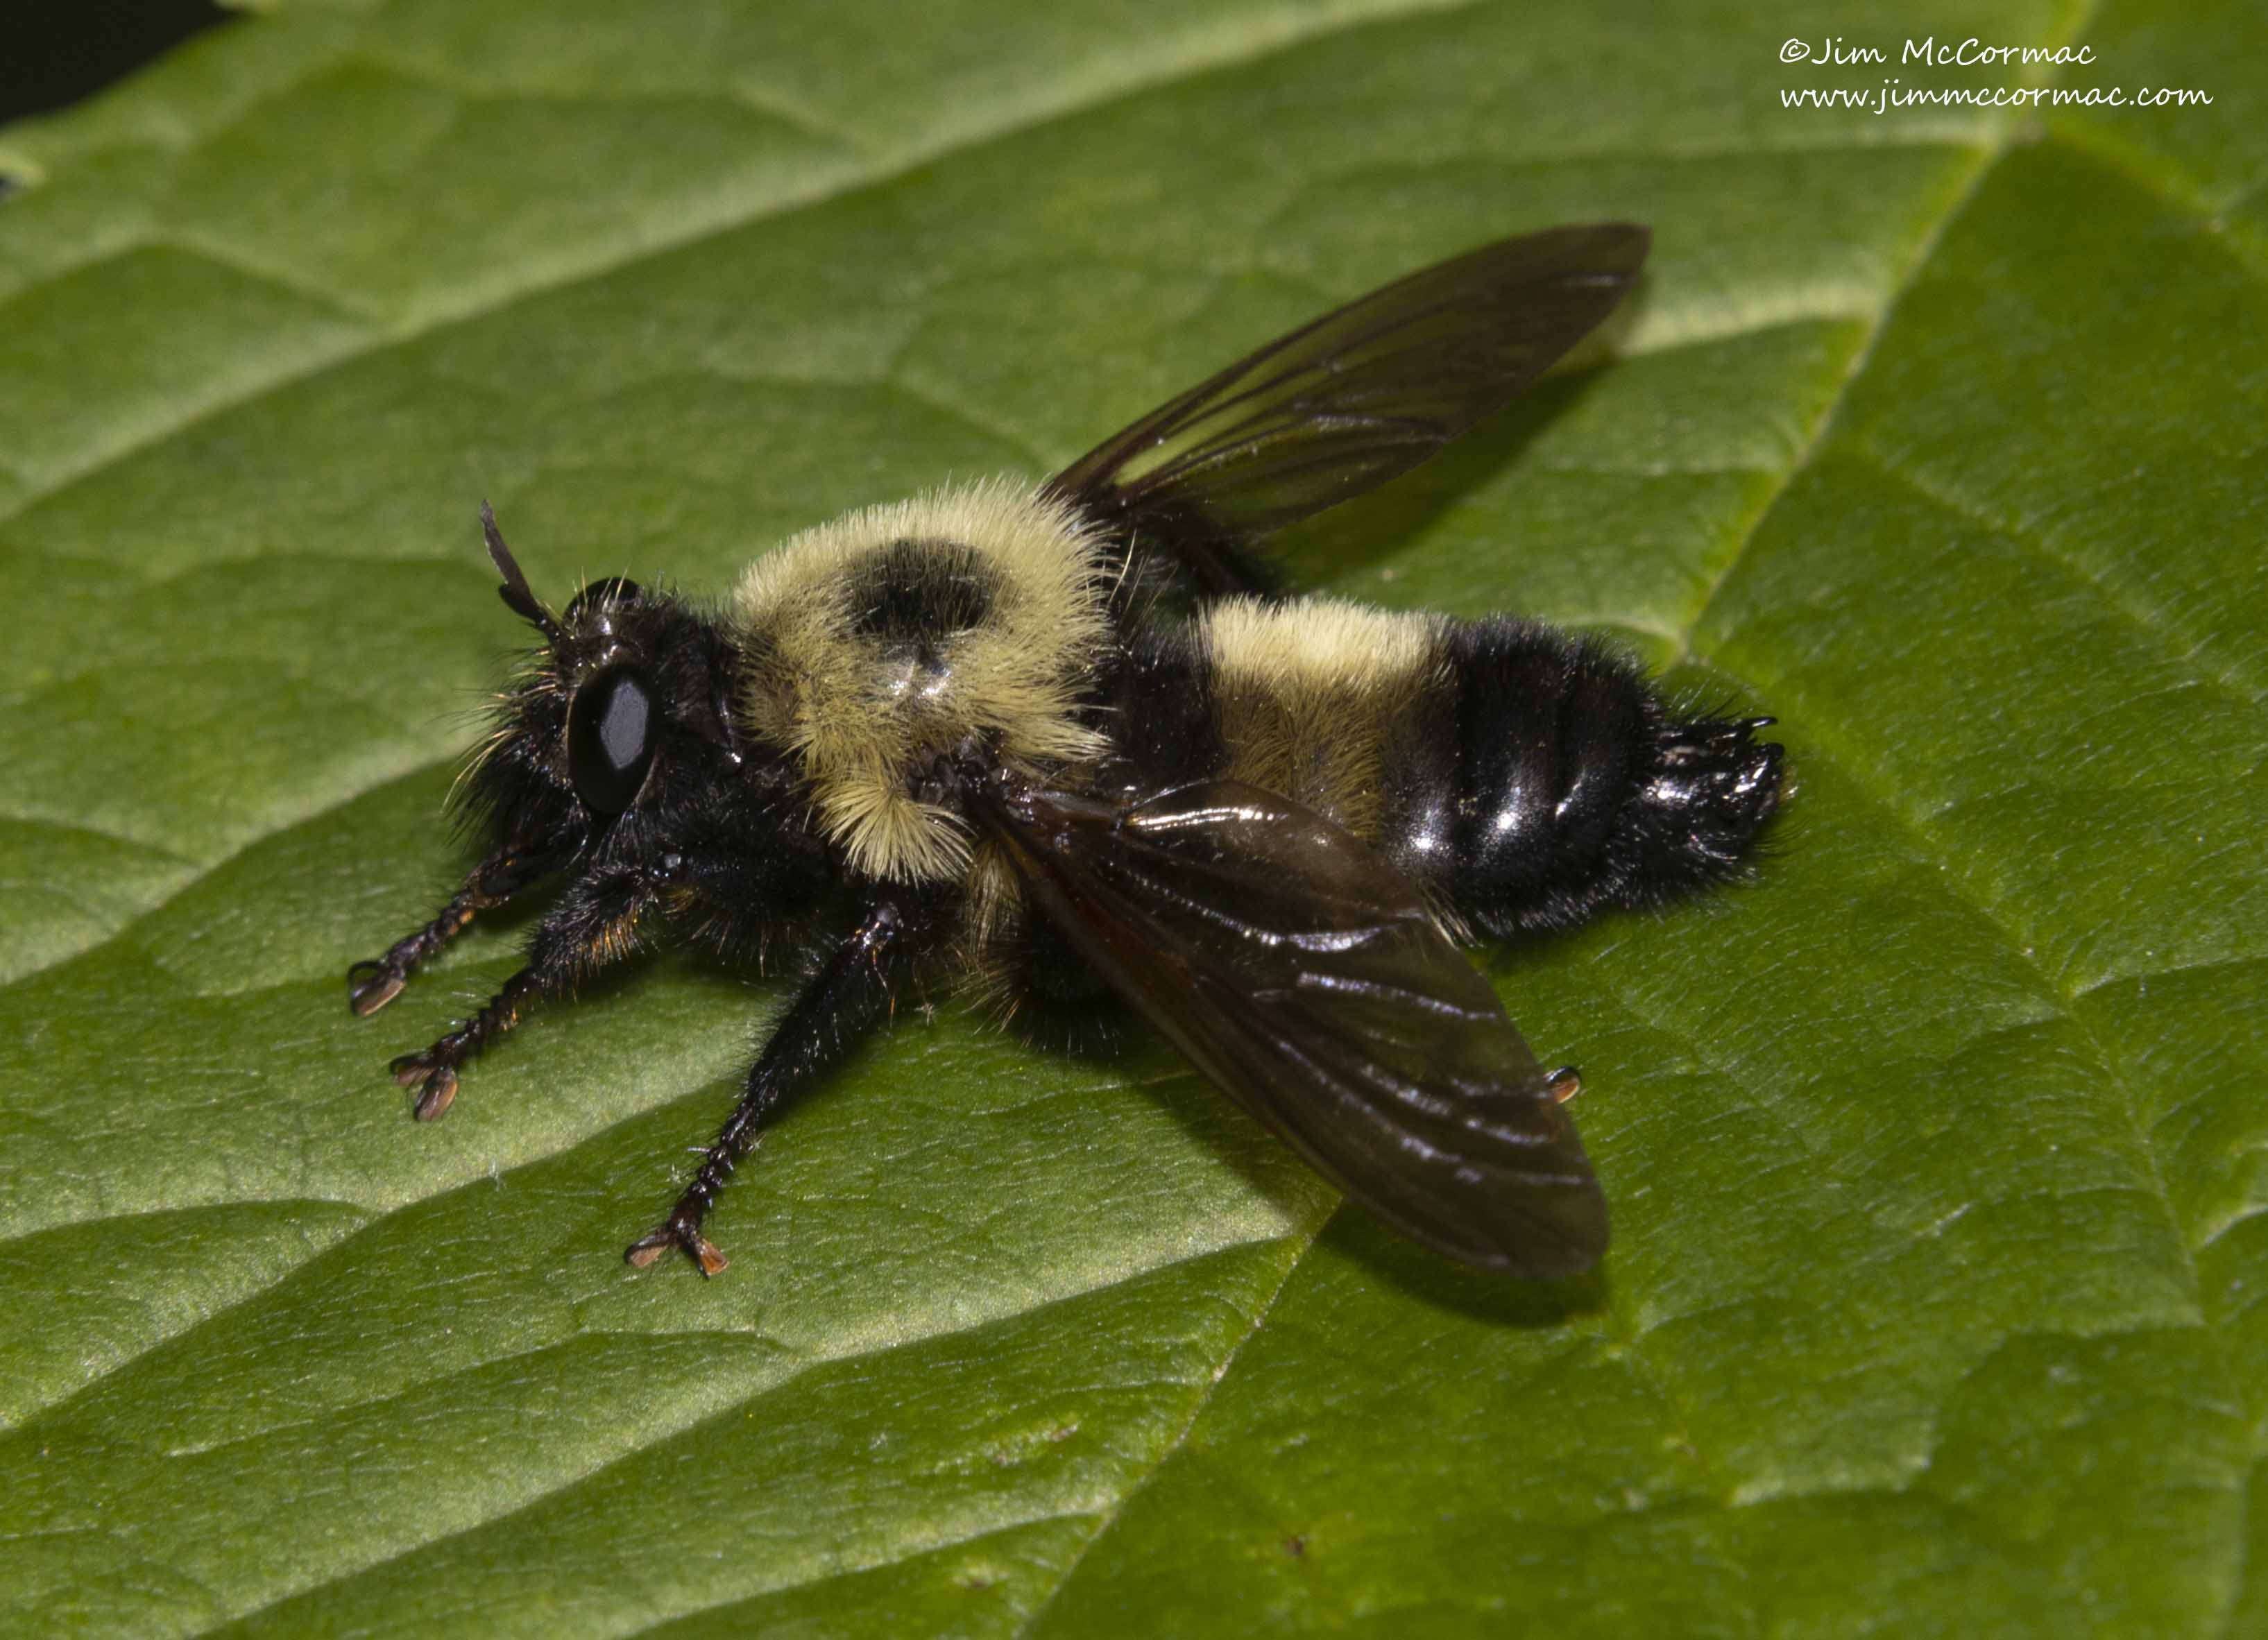 Bumble Bee and Wasp Wings - Lichen Labs